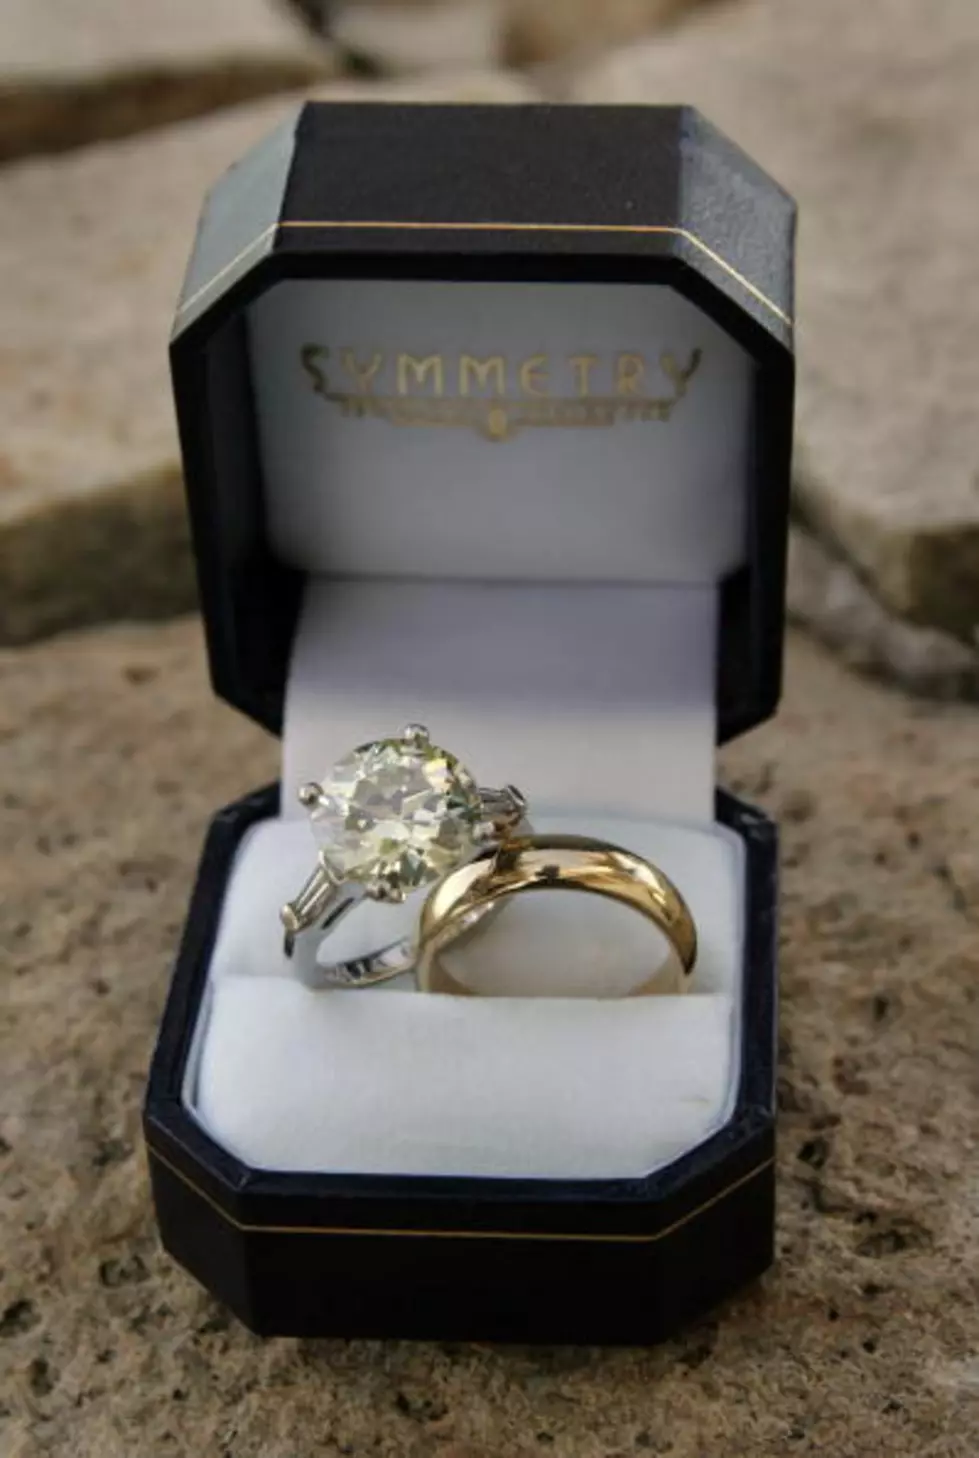 Husband Accidentally Sells Wife’s Wedding Ring for $10 [AUDIO]